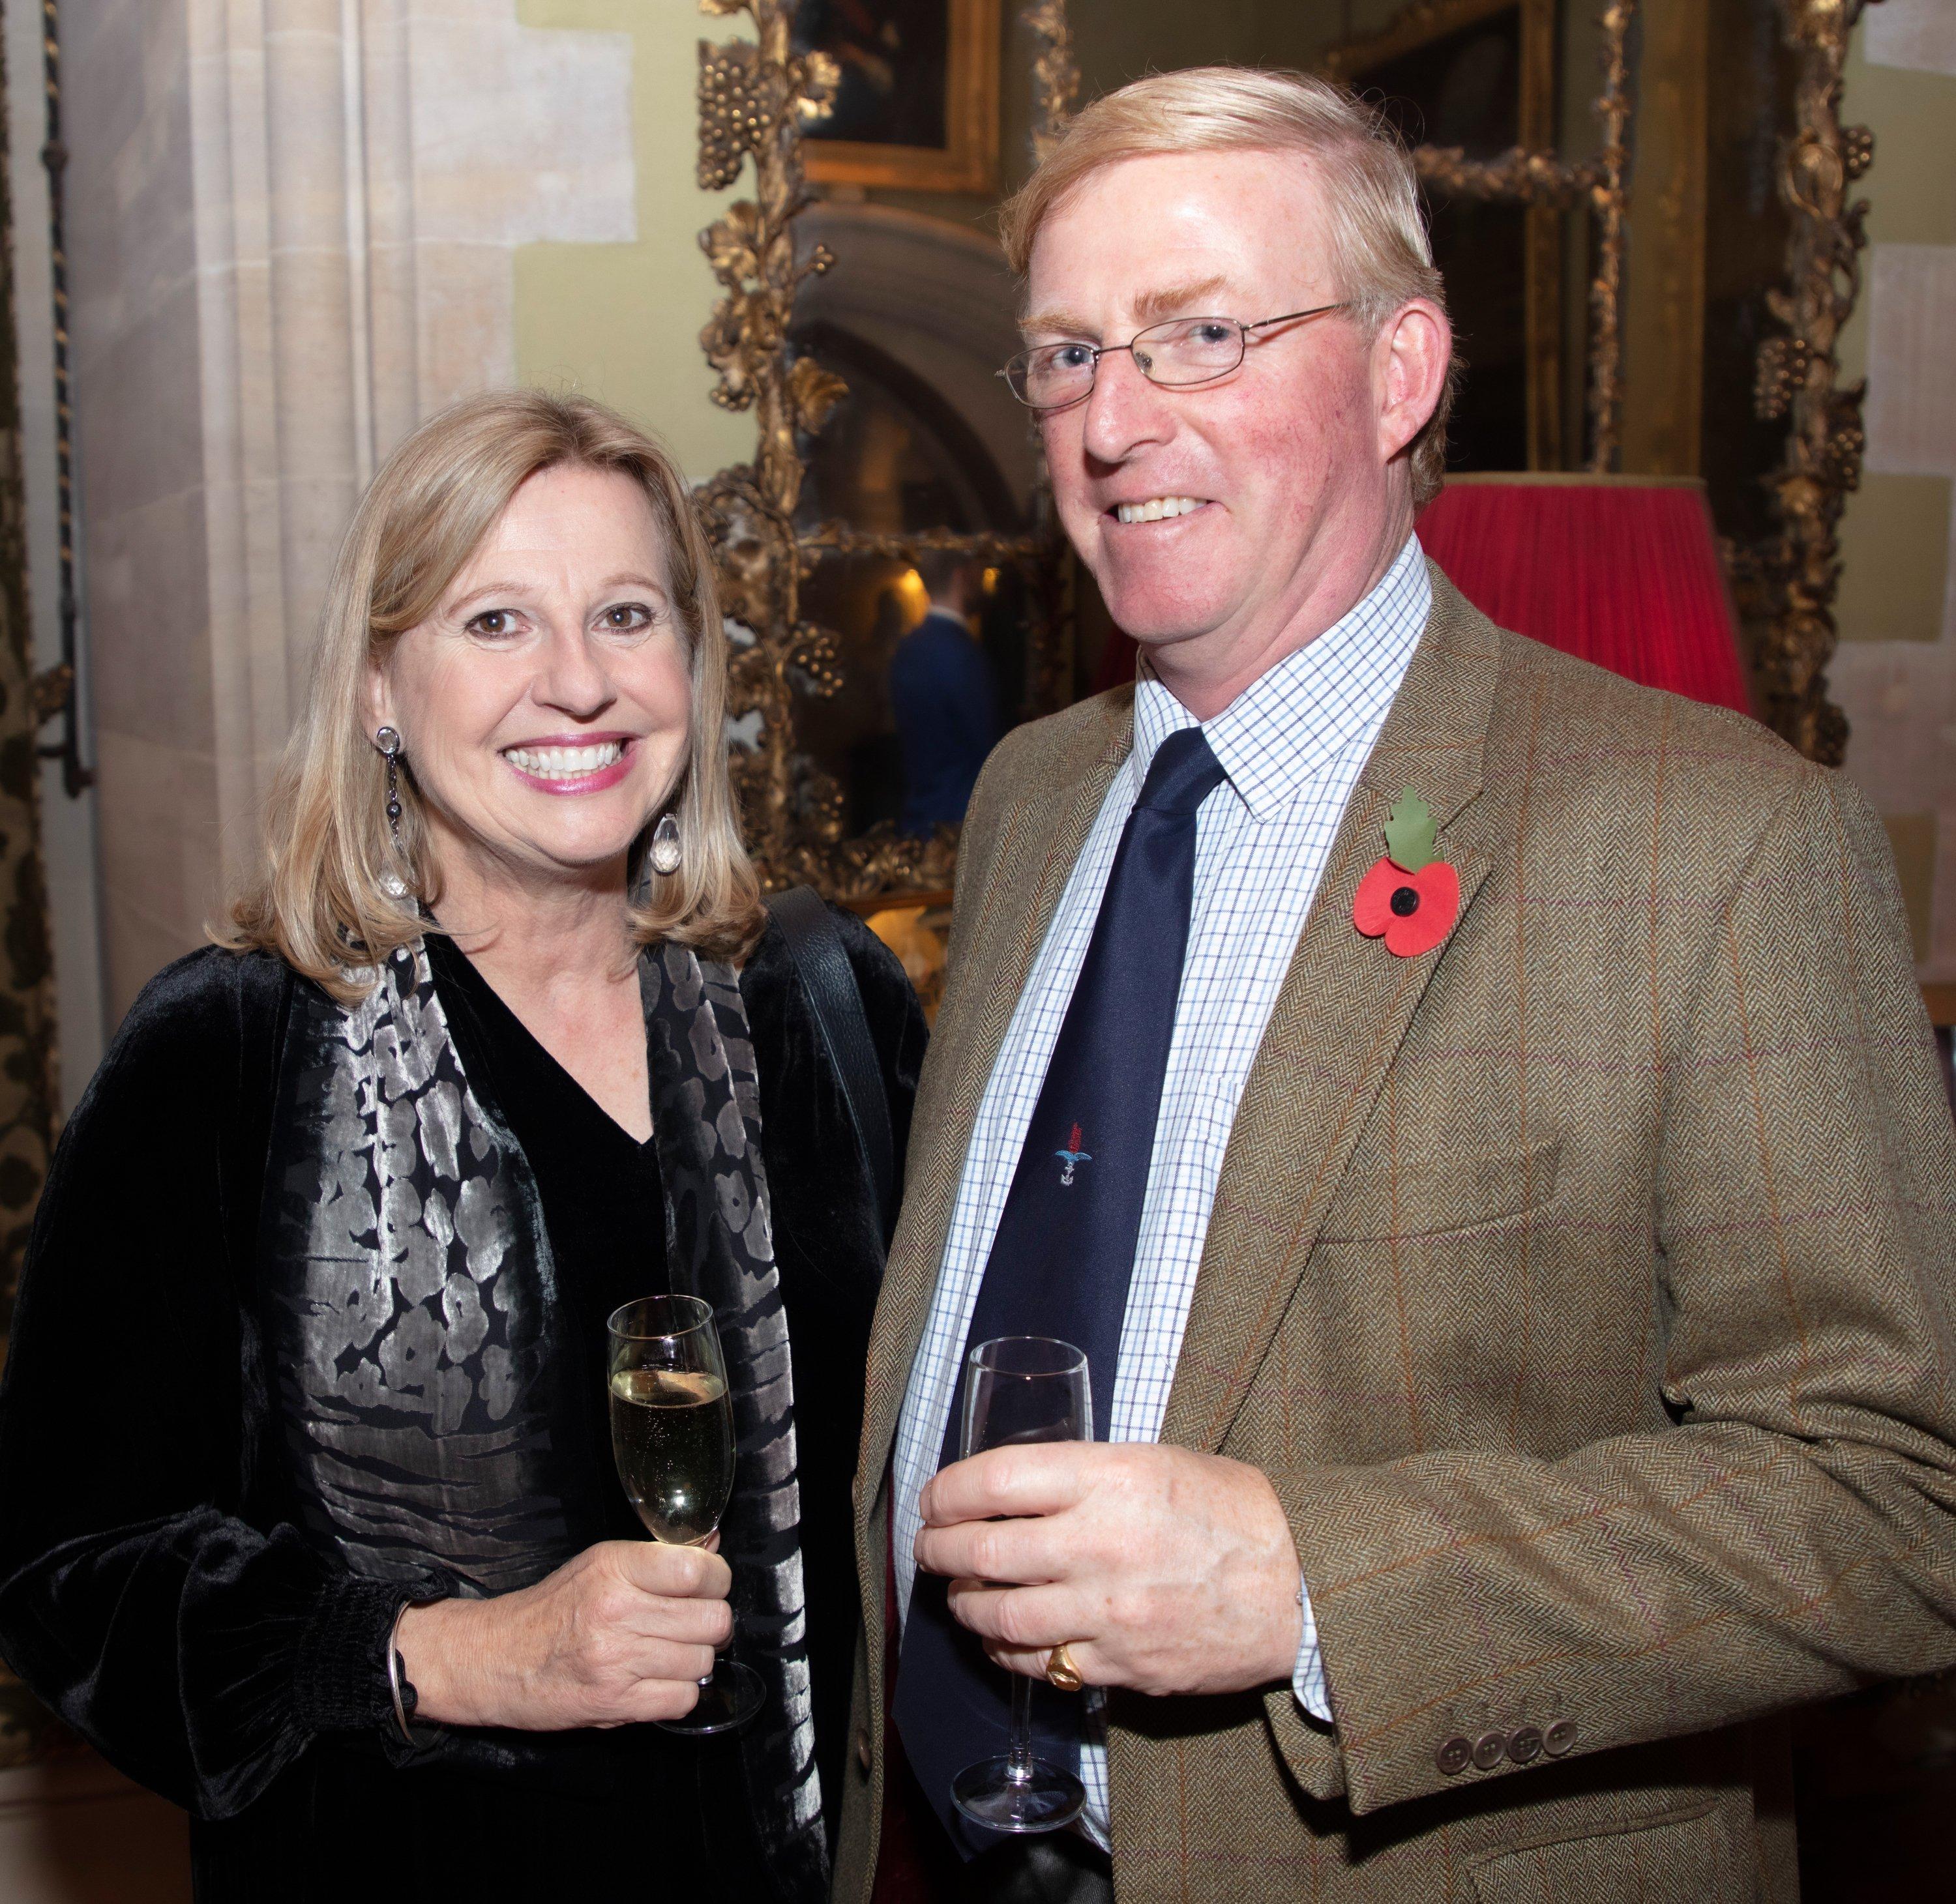 Care for Veterans trustee John Saville and his wife Jane. Picture: Graham Franks Photography